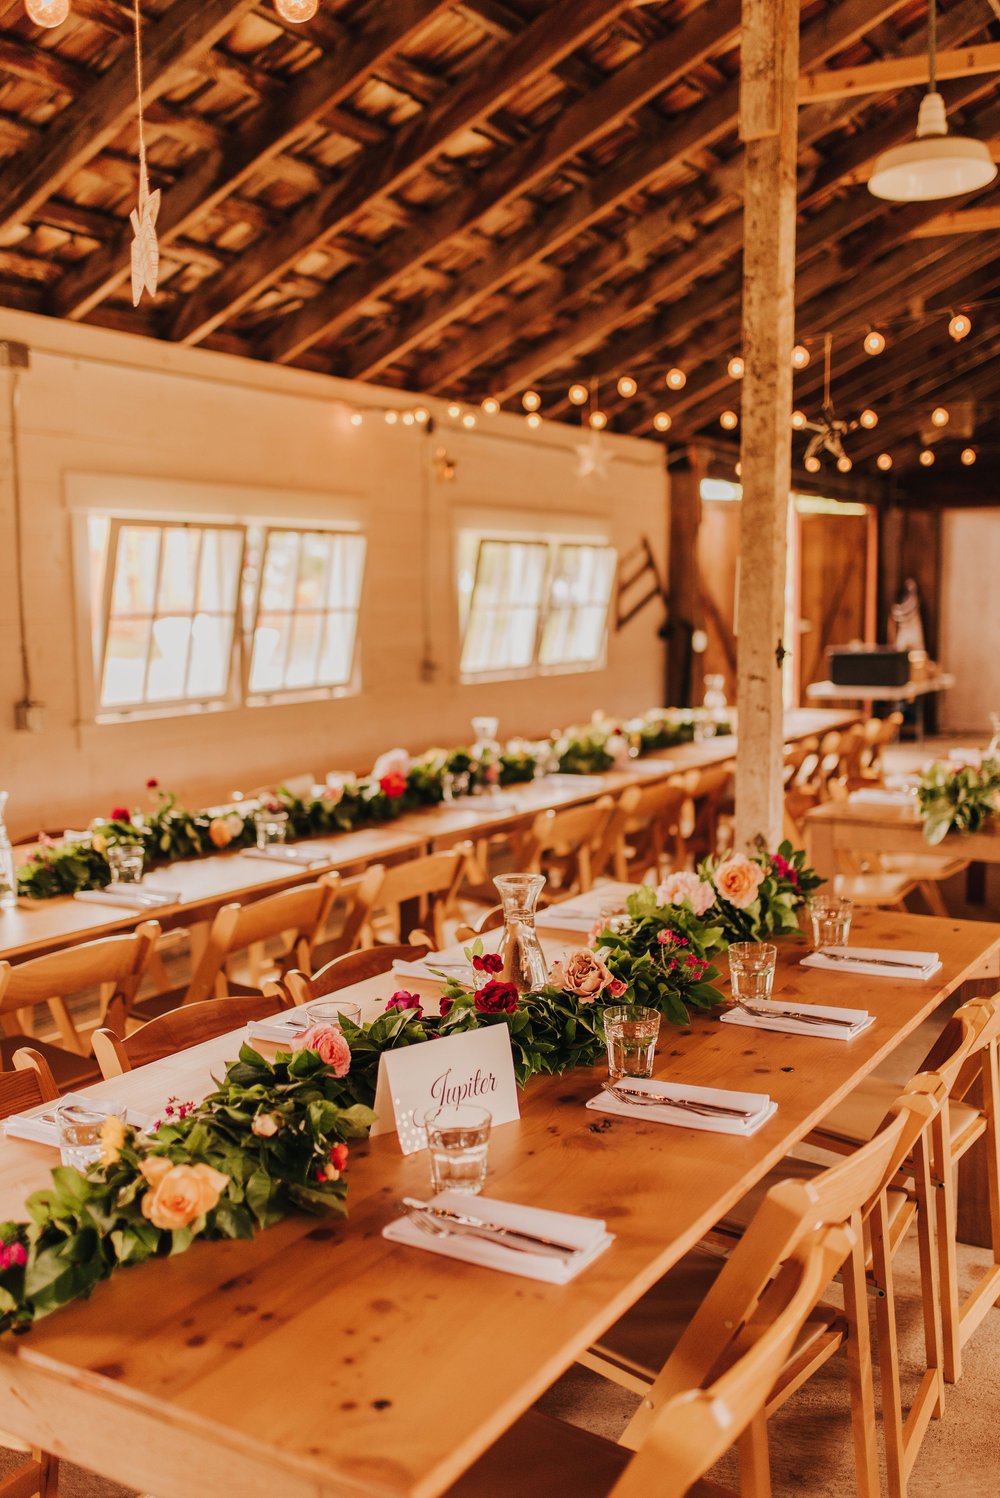  Tables are set in a barn for a wedding reception. There are floral runners down the middle of the tables and cafe lights hanging from the ceiling. 